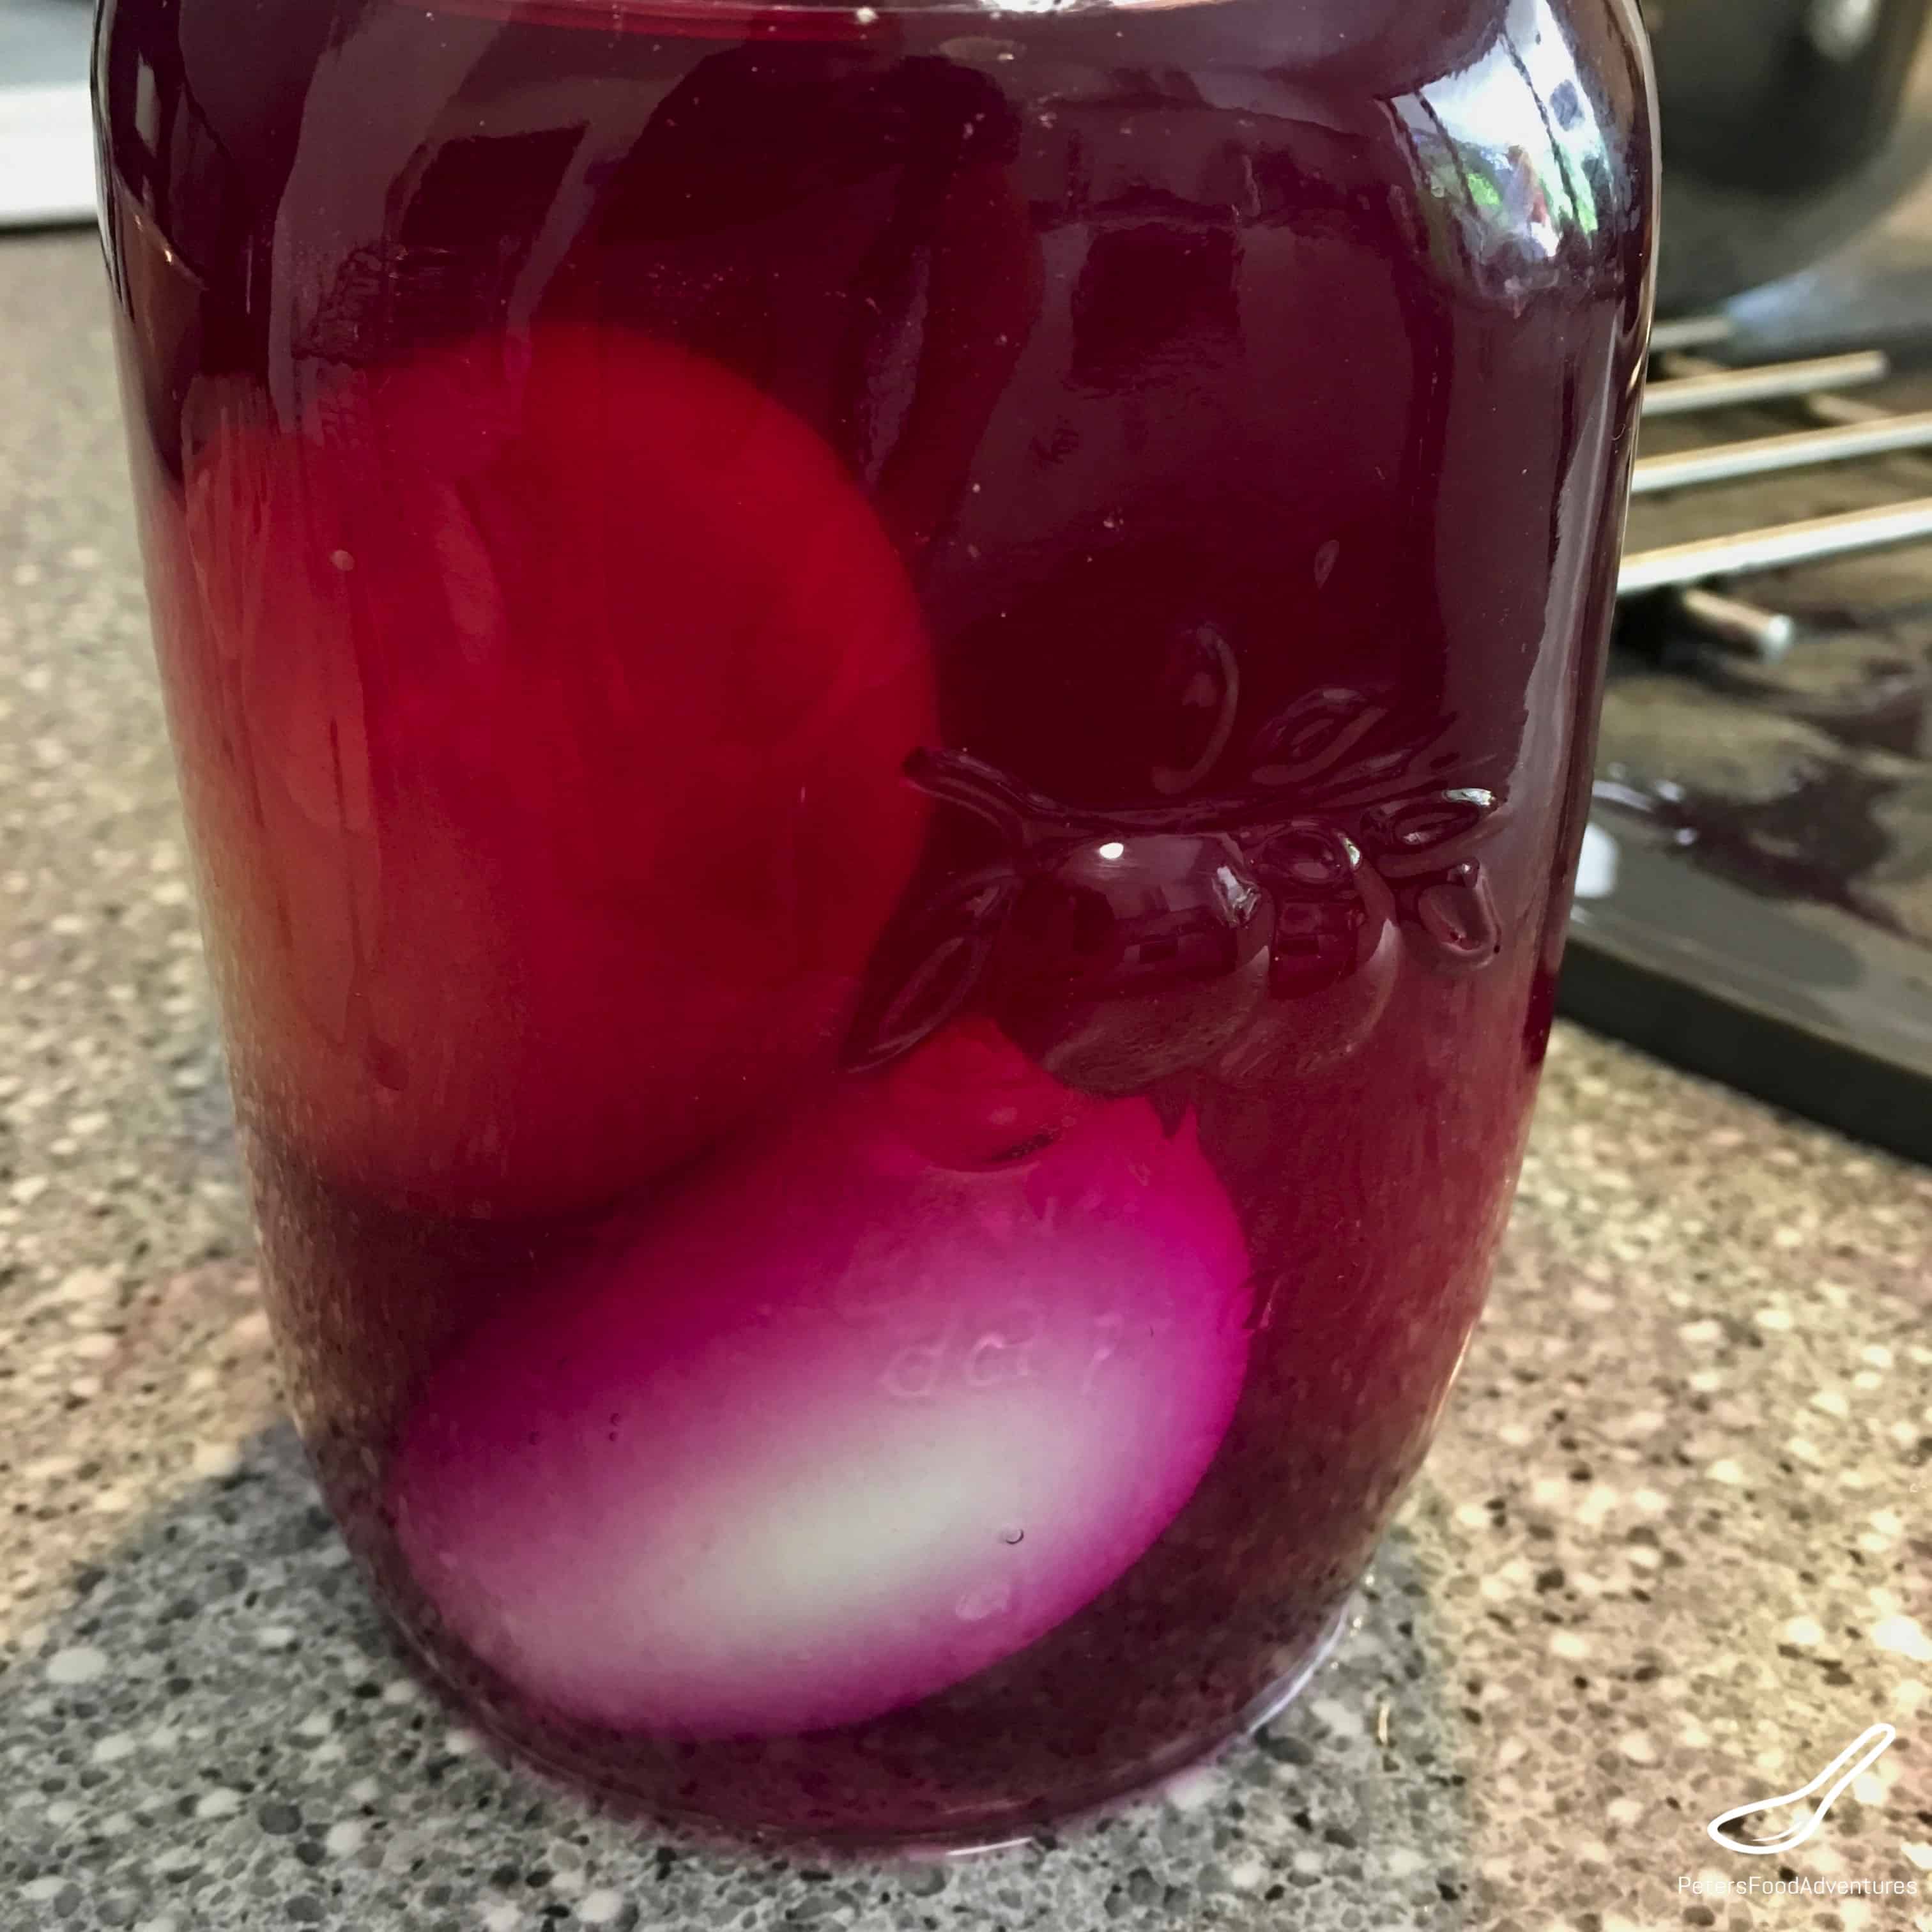 Making Easter Eggs - White eggs in red cabbage dye solution